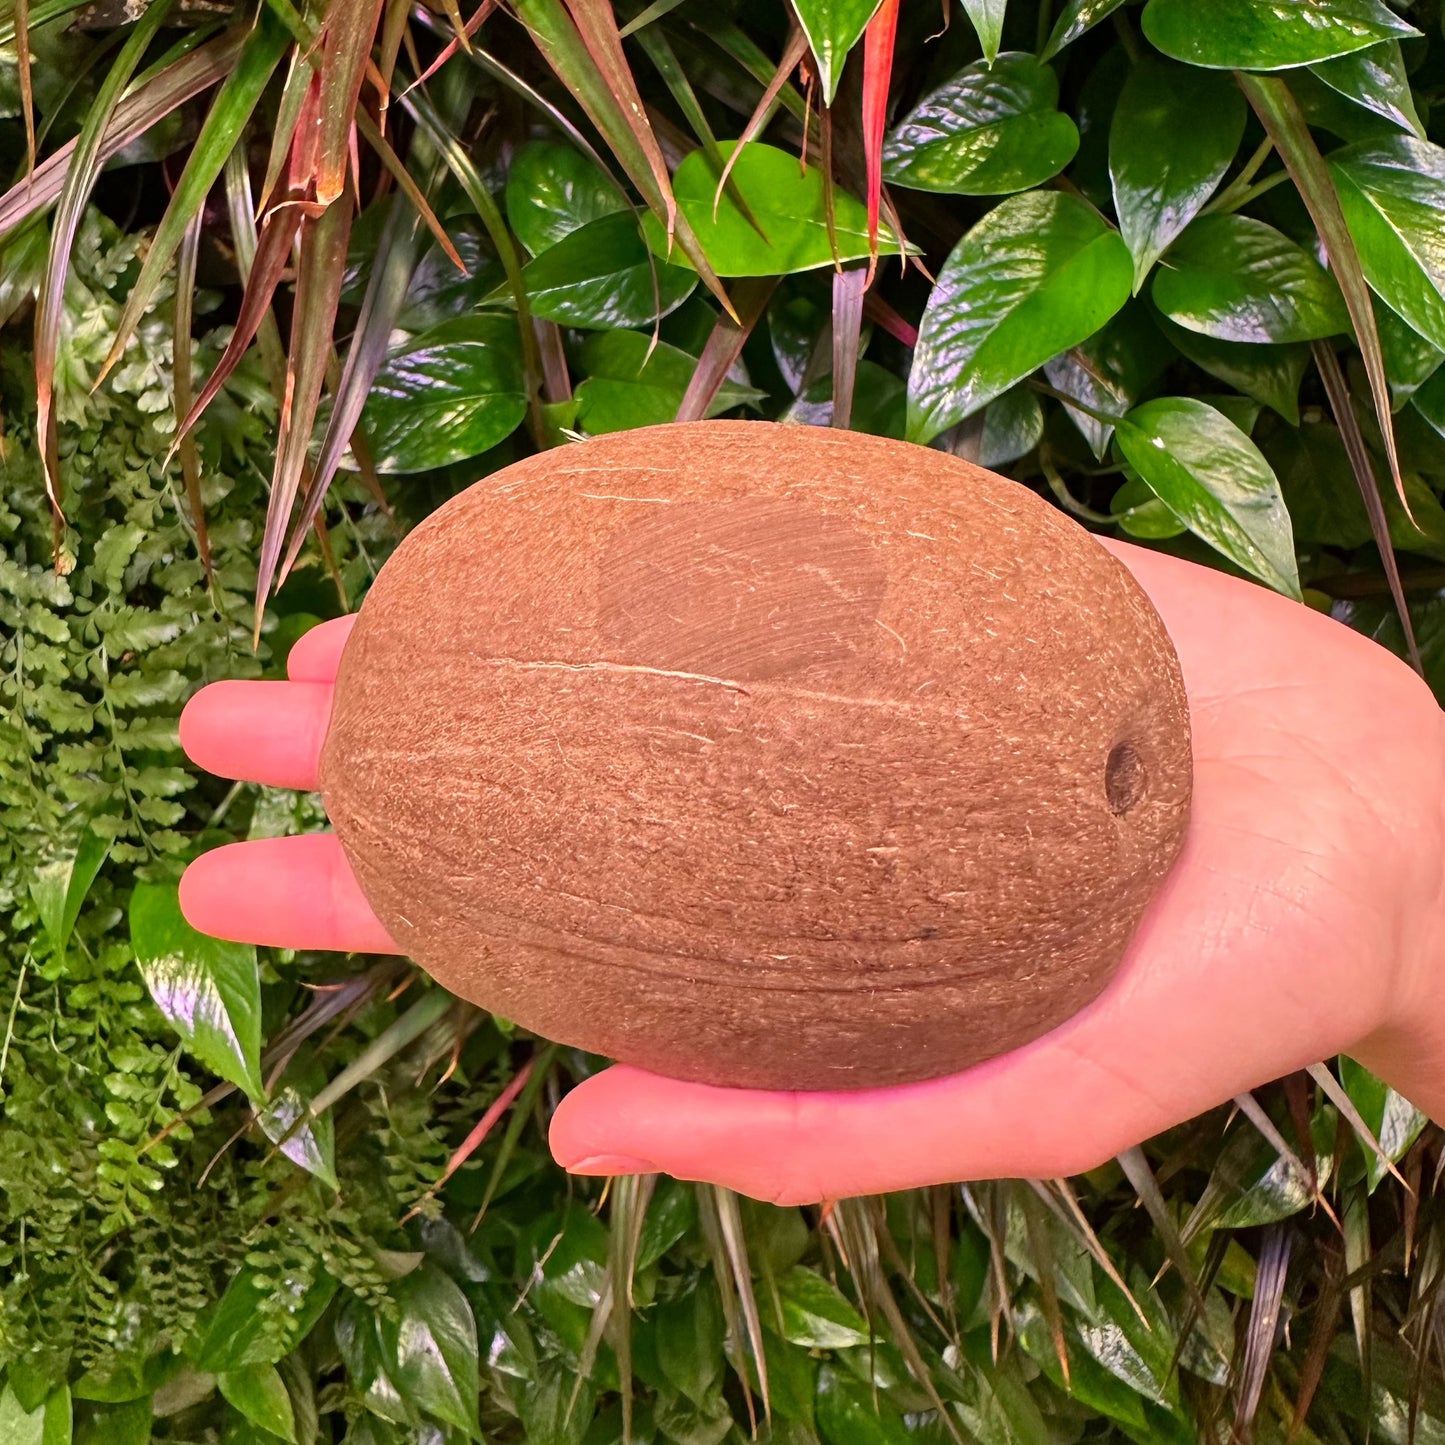 coconut shell half bottom with sanded flat spot for use as coco bowl or coconut cup